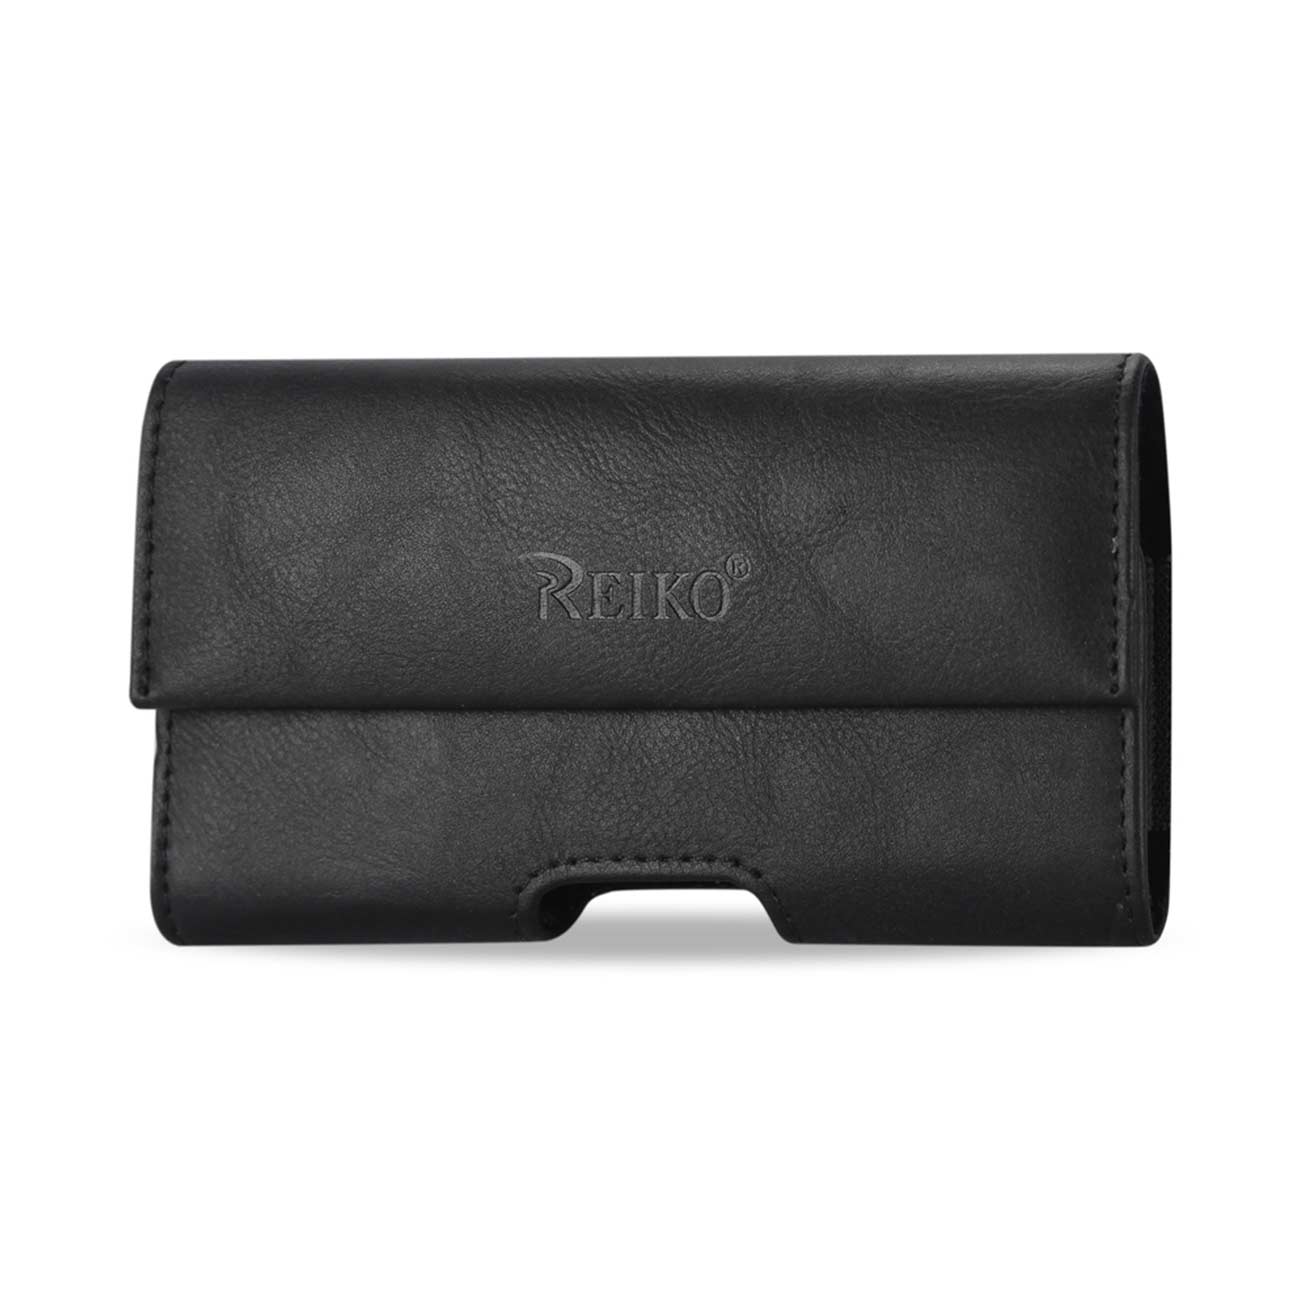 Pouch/ Phone Holster Leather Horizontal Flat Closure Embossed Logo Black Color In Poly Bag Packaging